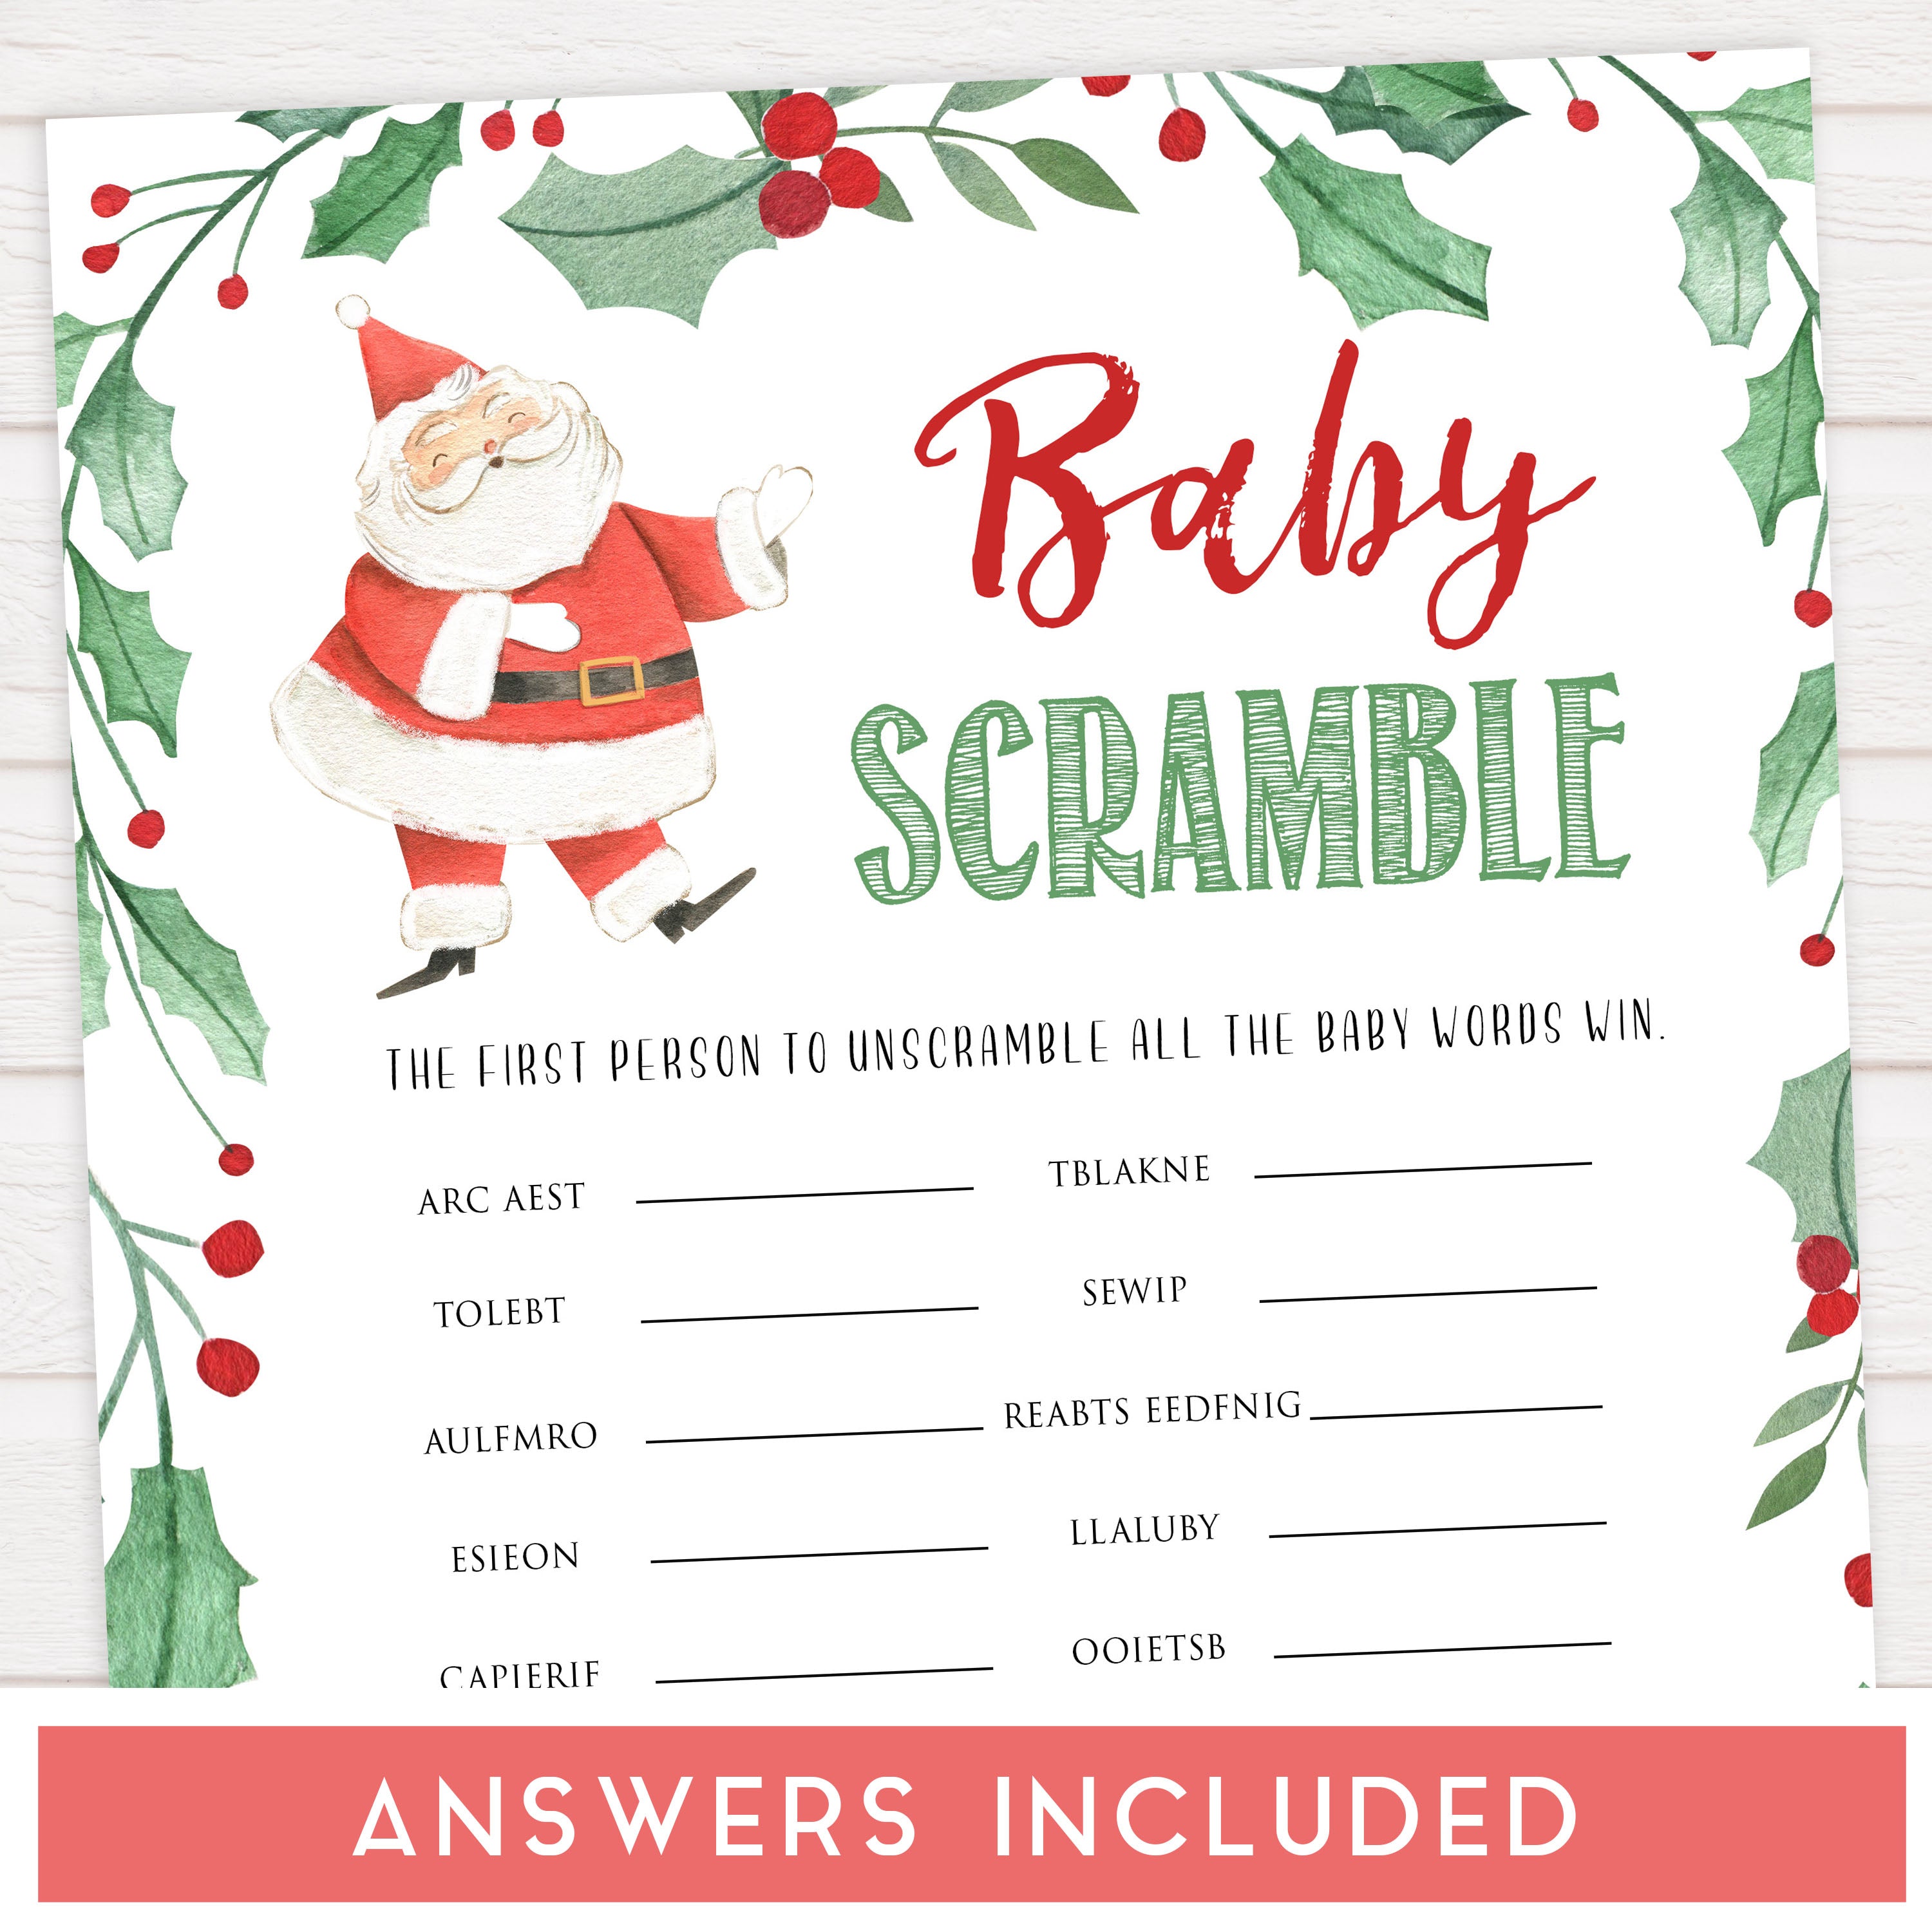 Christmas baby shower games, baby shower scramble, festive baby shower games, best baby shower games, top 10 baby games, baby shower ideas, baby shower games